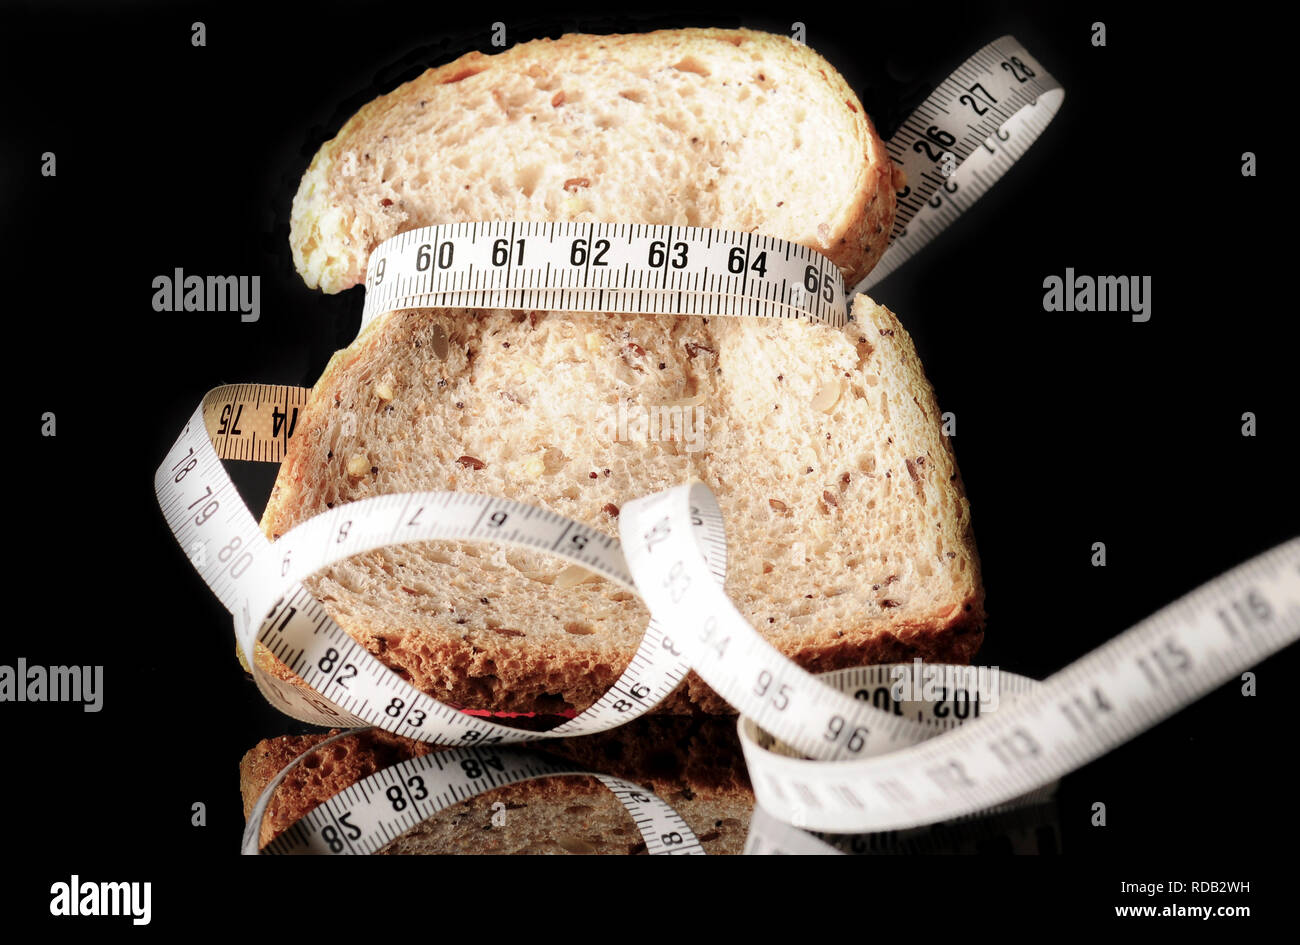 A slice of bread surrounded by a measurement tape on black with reflection Stock Photo